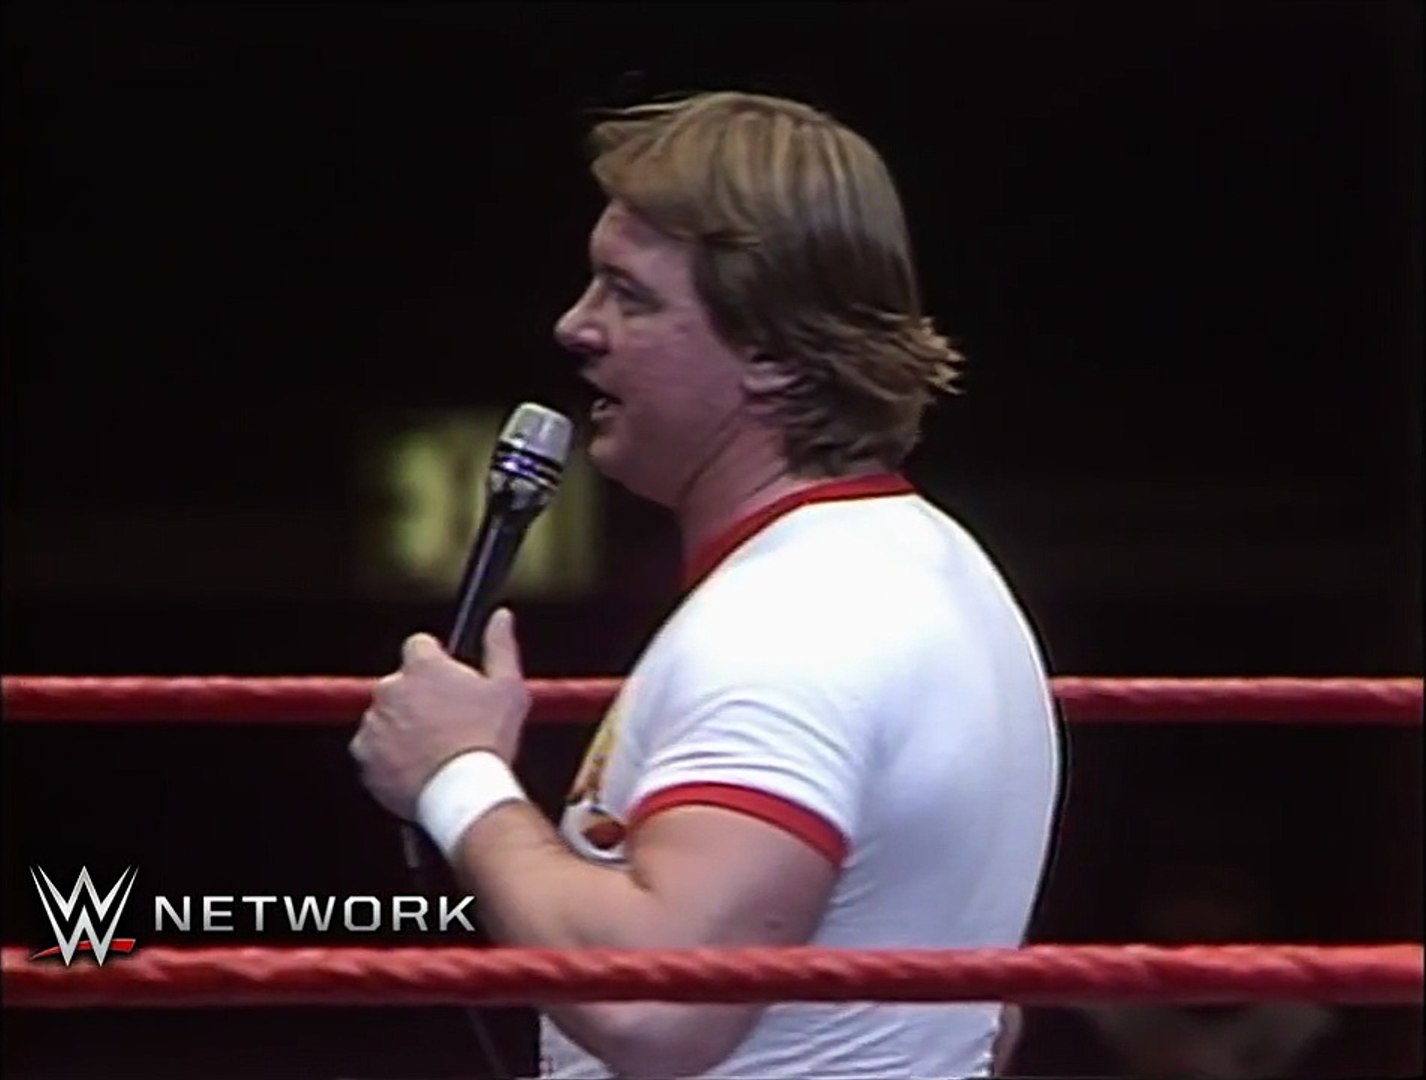 Roddy Piper says the New York Mets will overcome: October 20, 1986